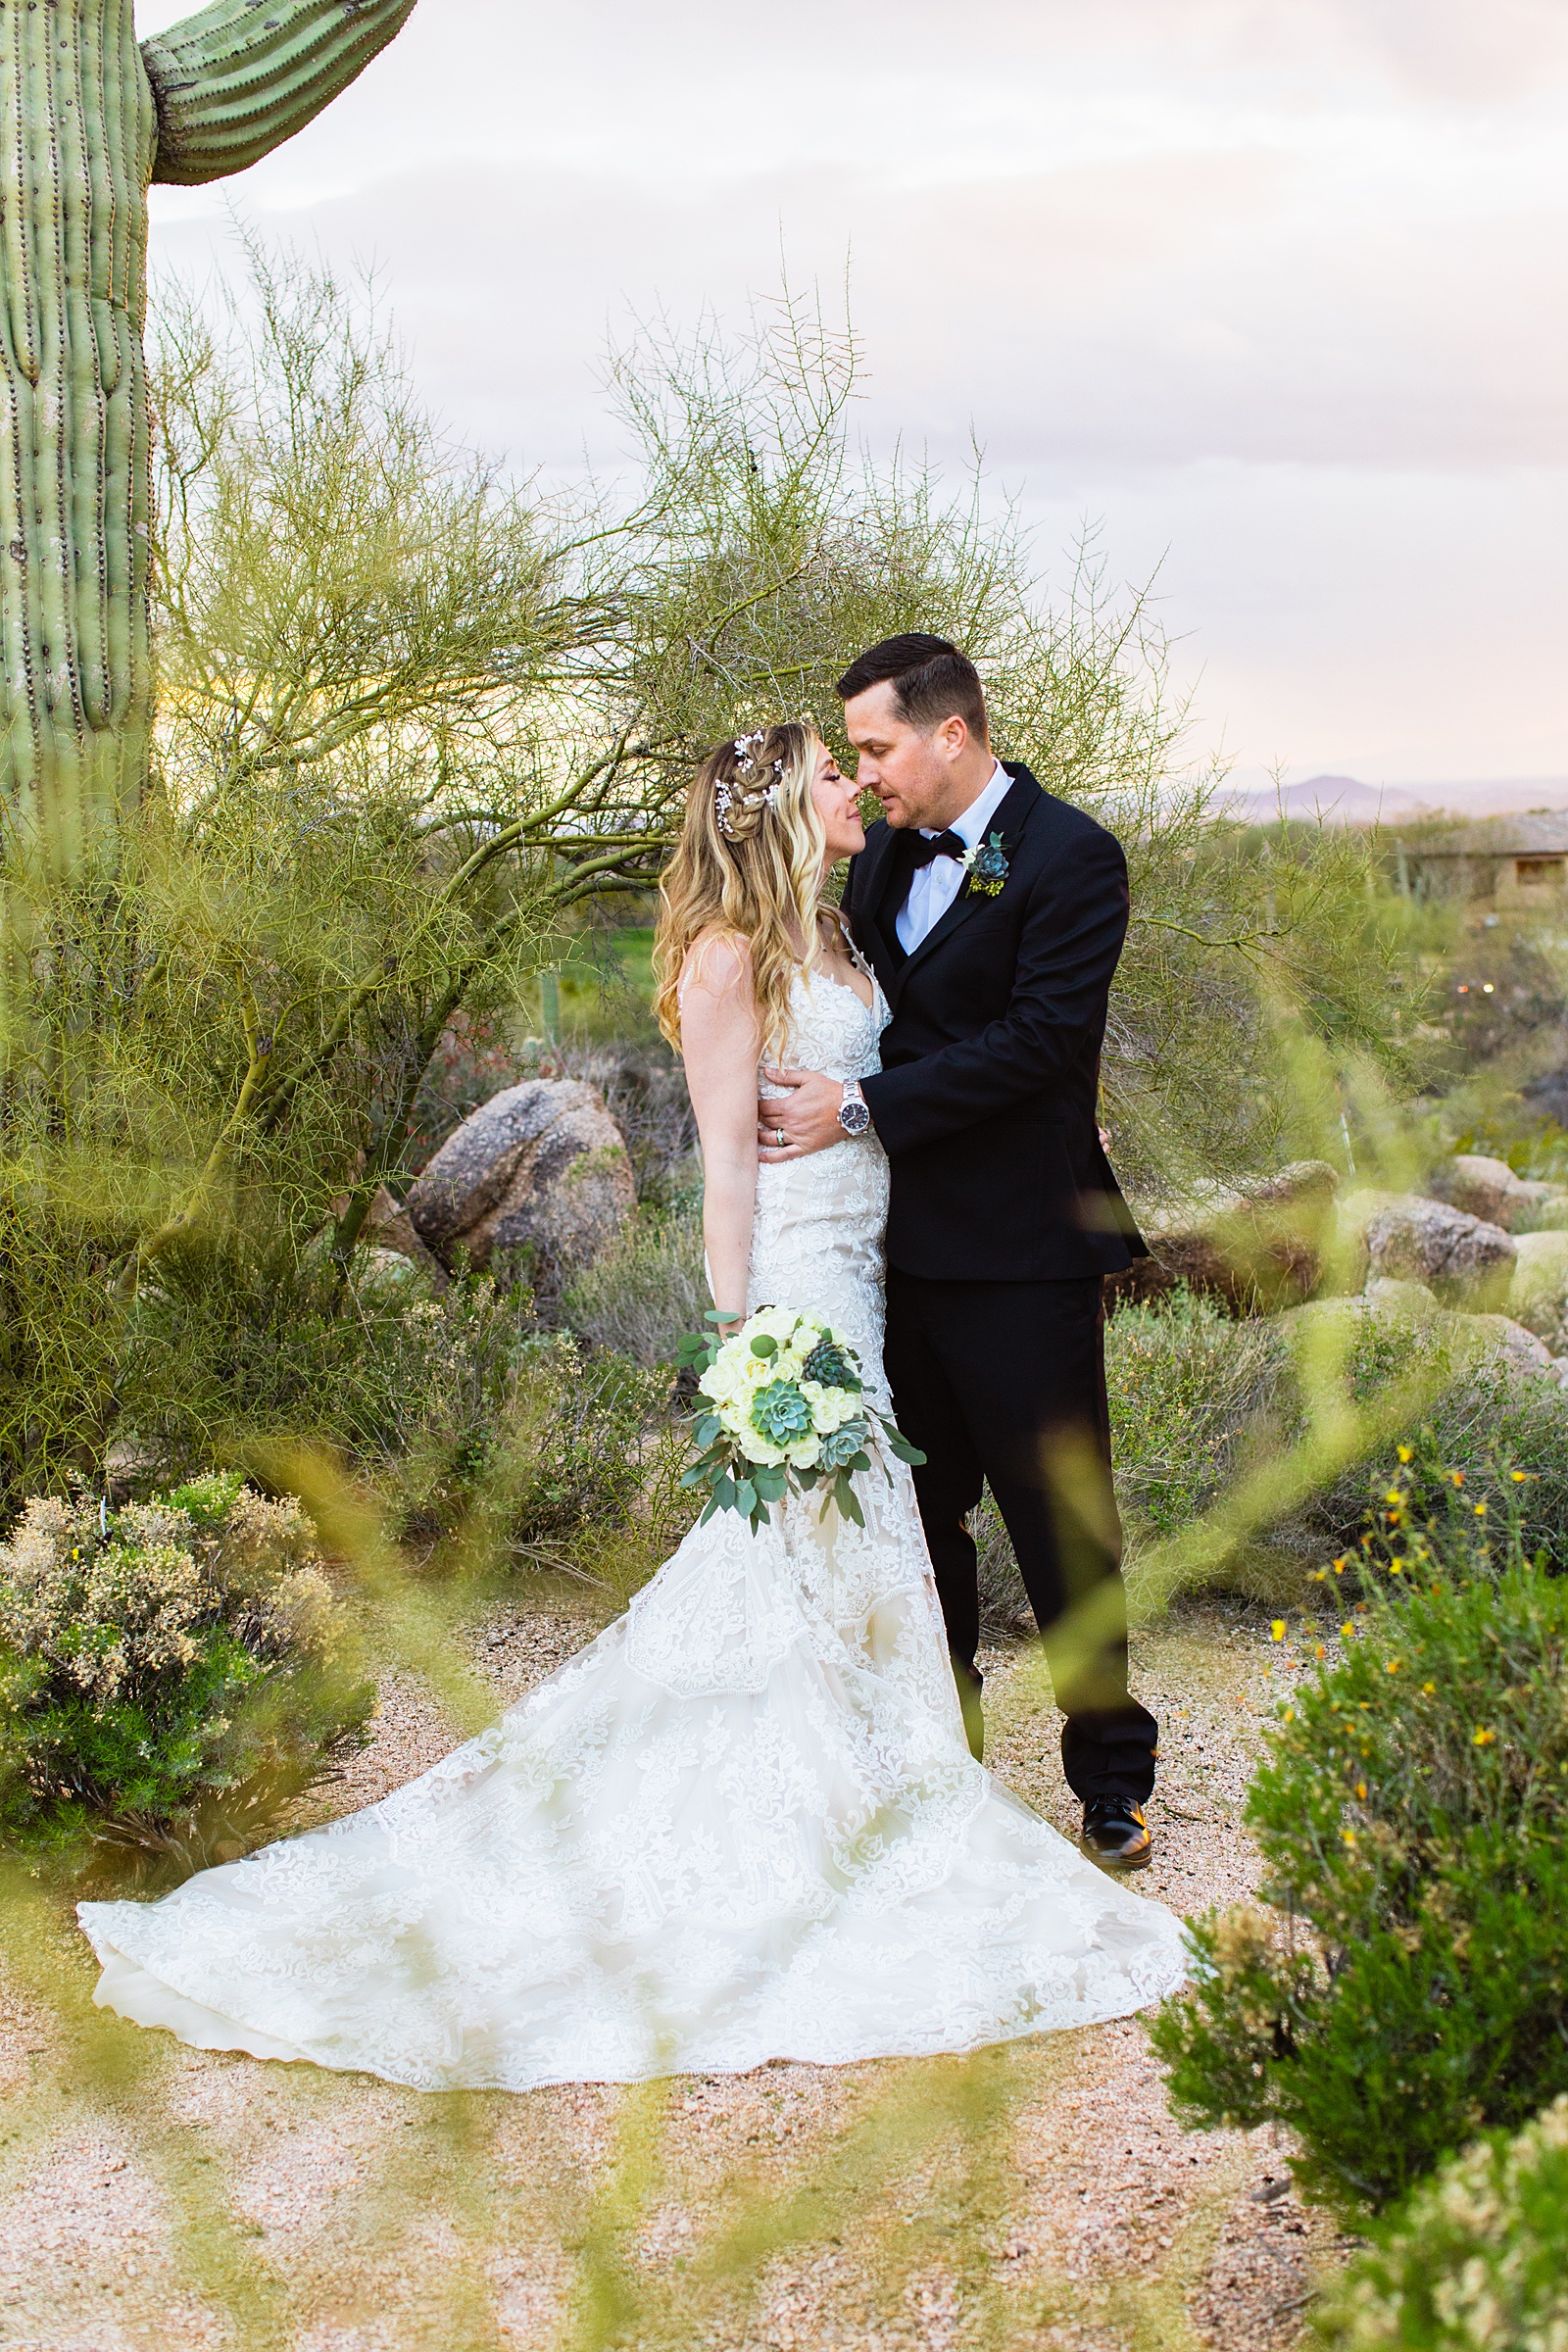 Newlyweds share an intimate moment during their Troon North wedding by Scottsdale wedding photographer PMA Photography.